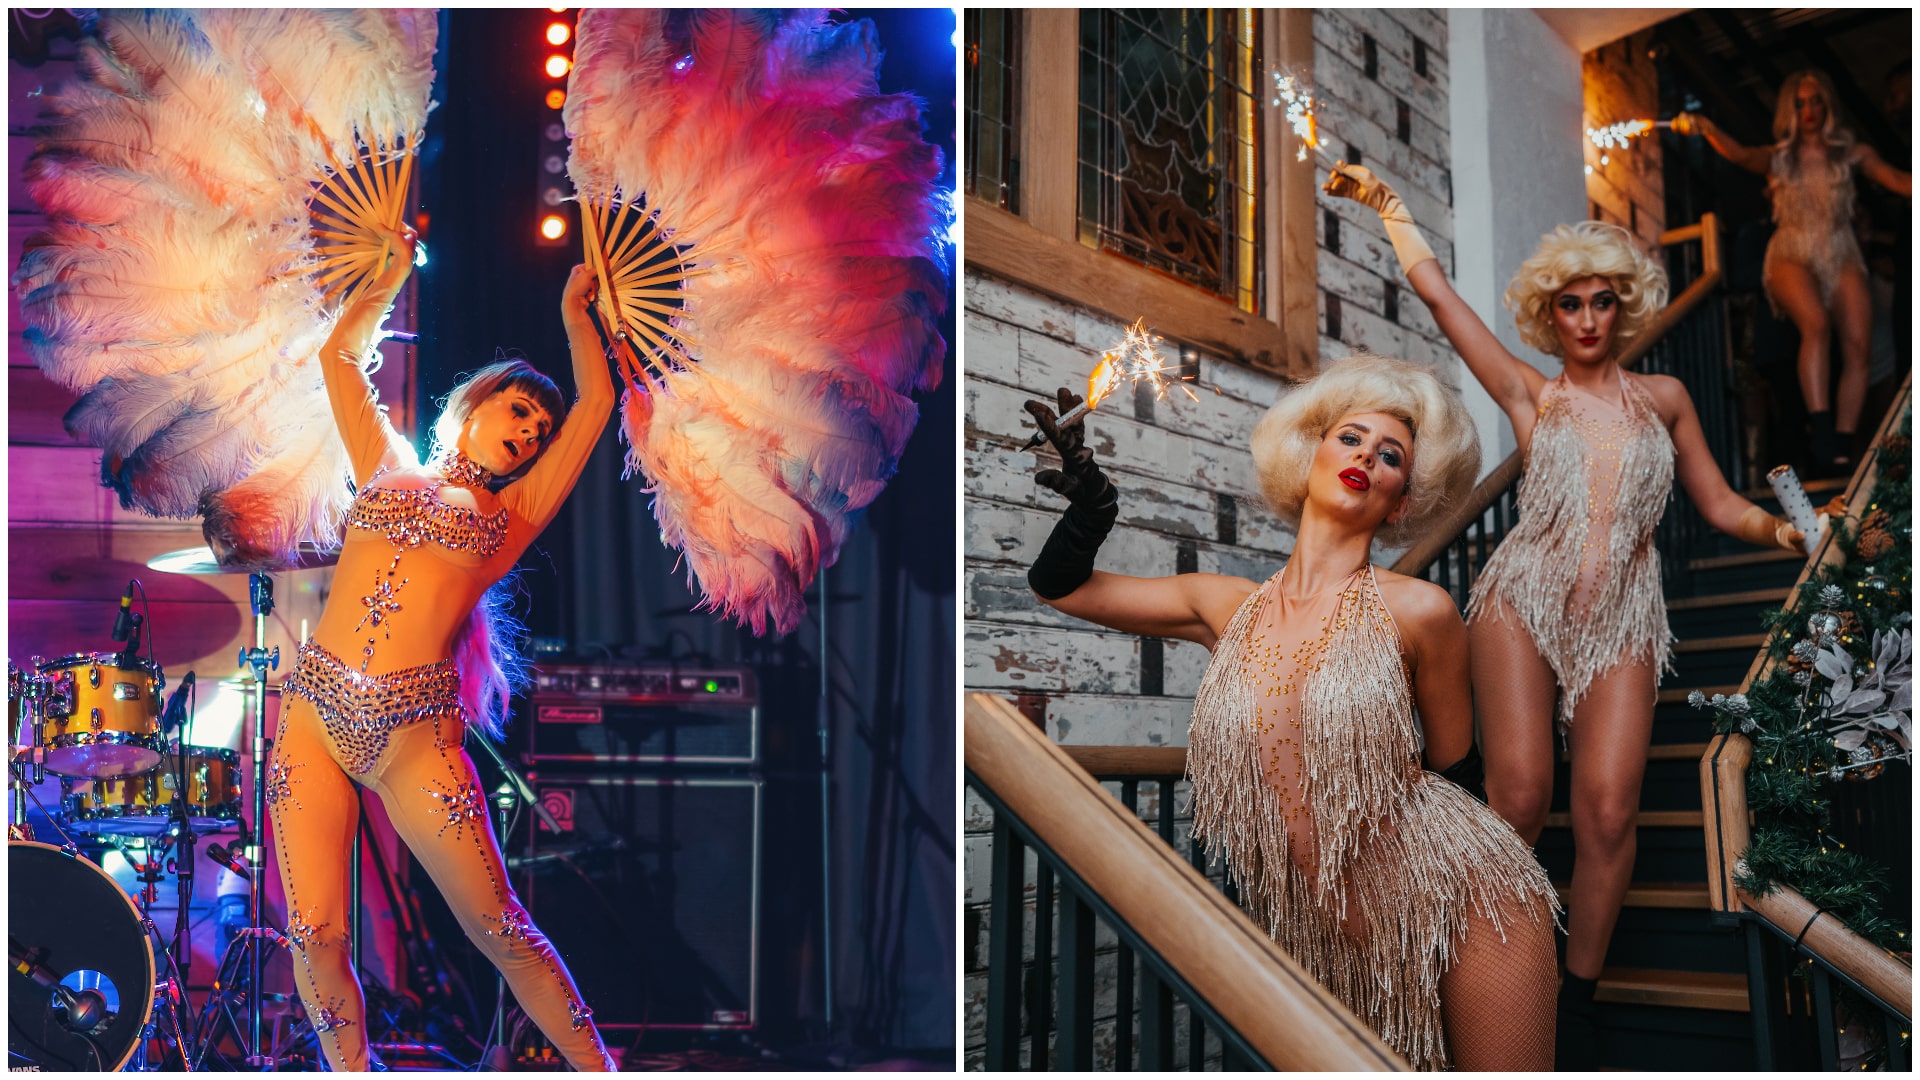 Three performers, one with a bright pink feathered fan and two dressed like Marylin Monroe at Albert Schloss.